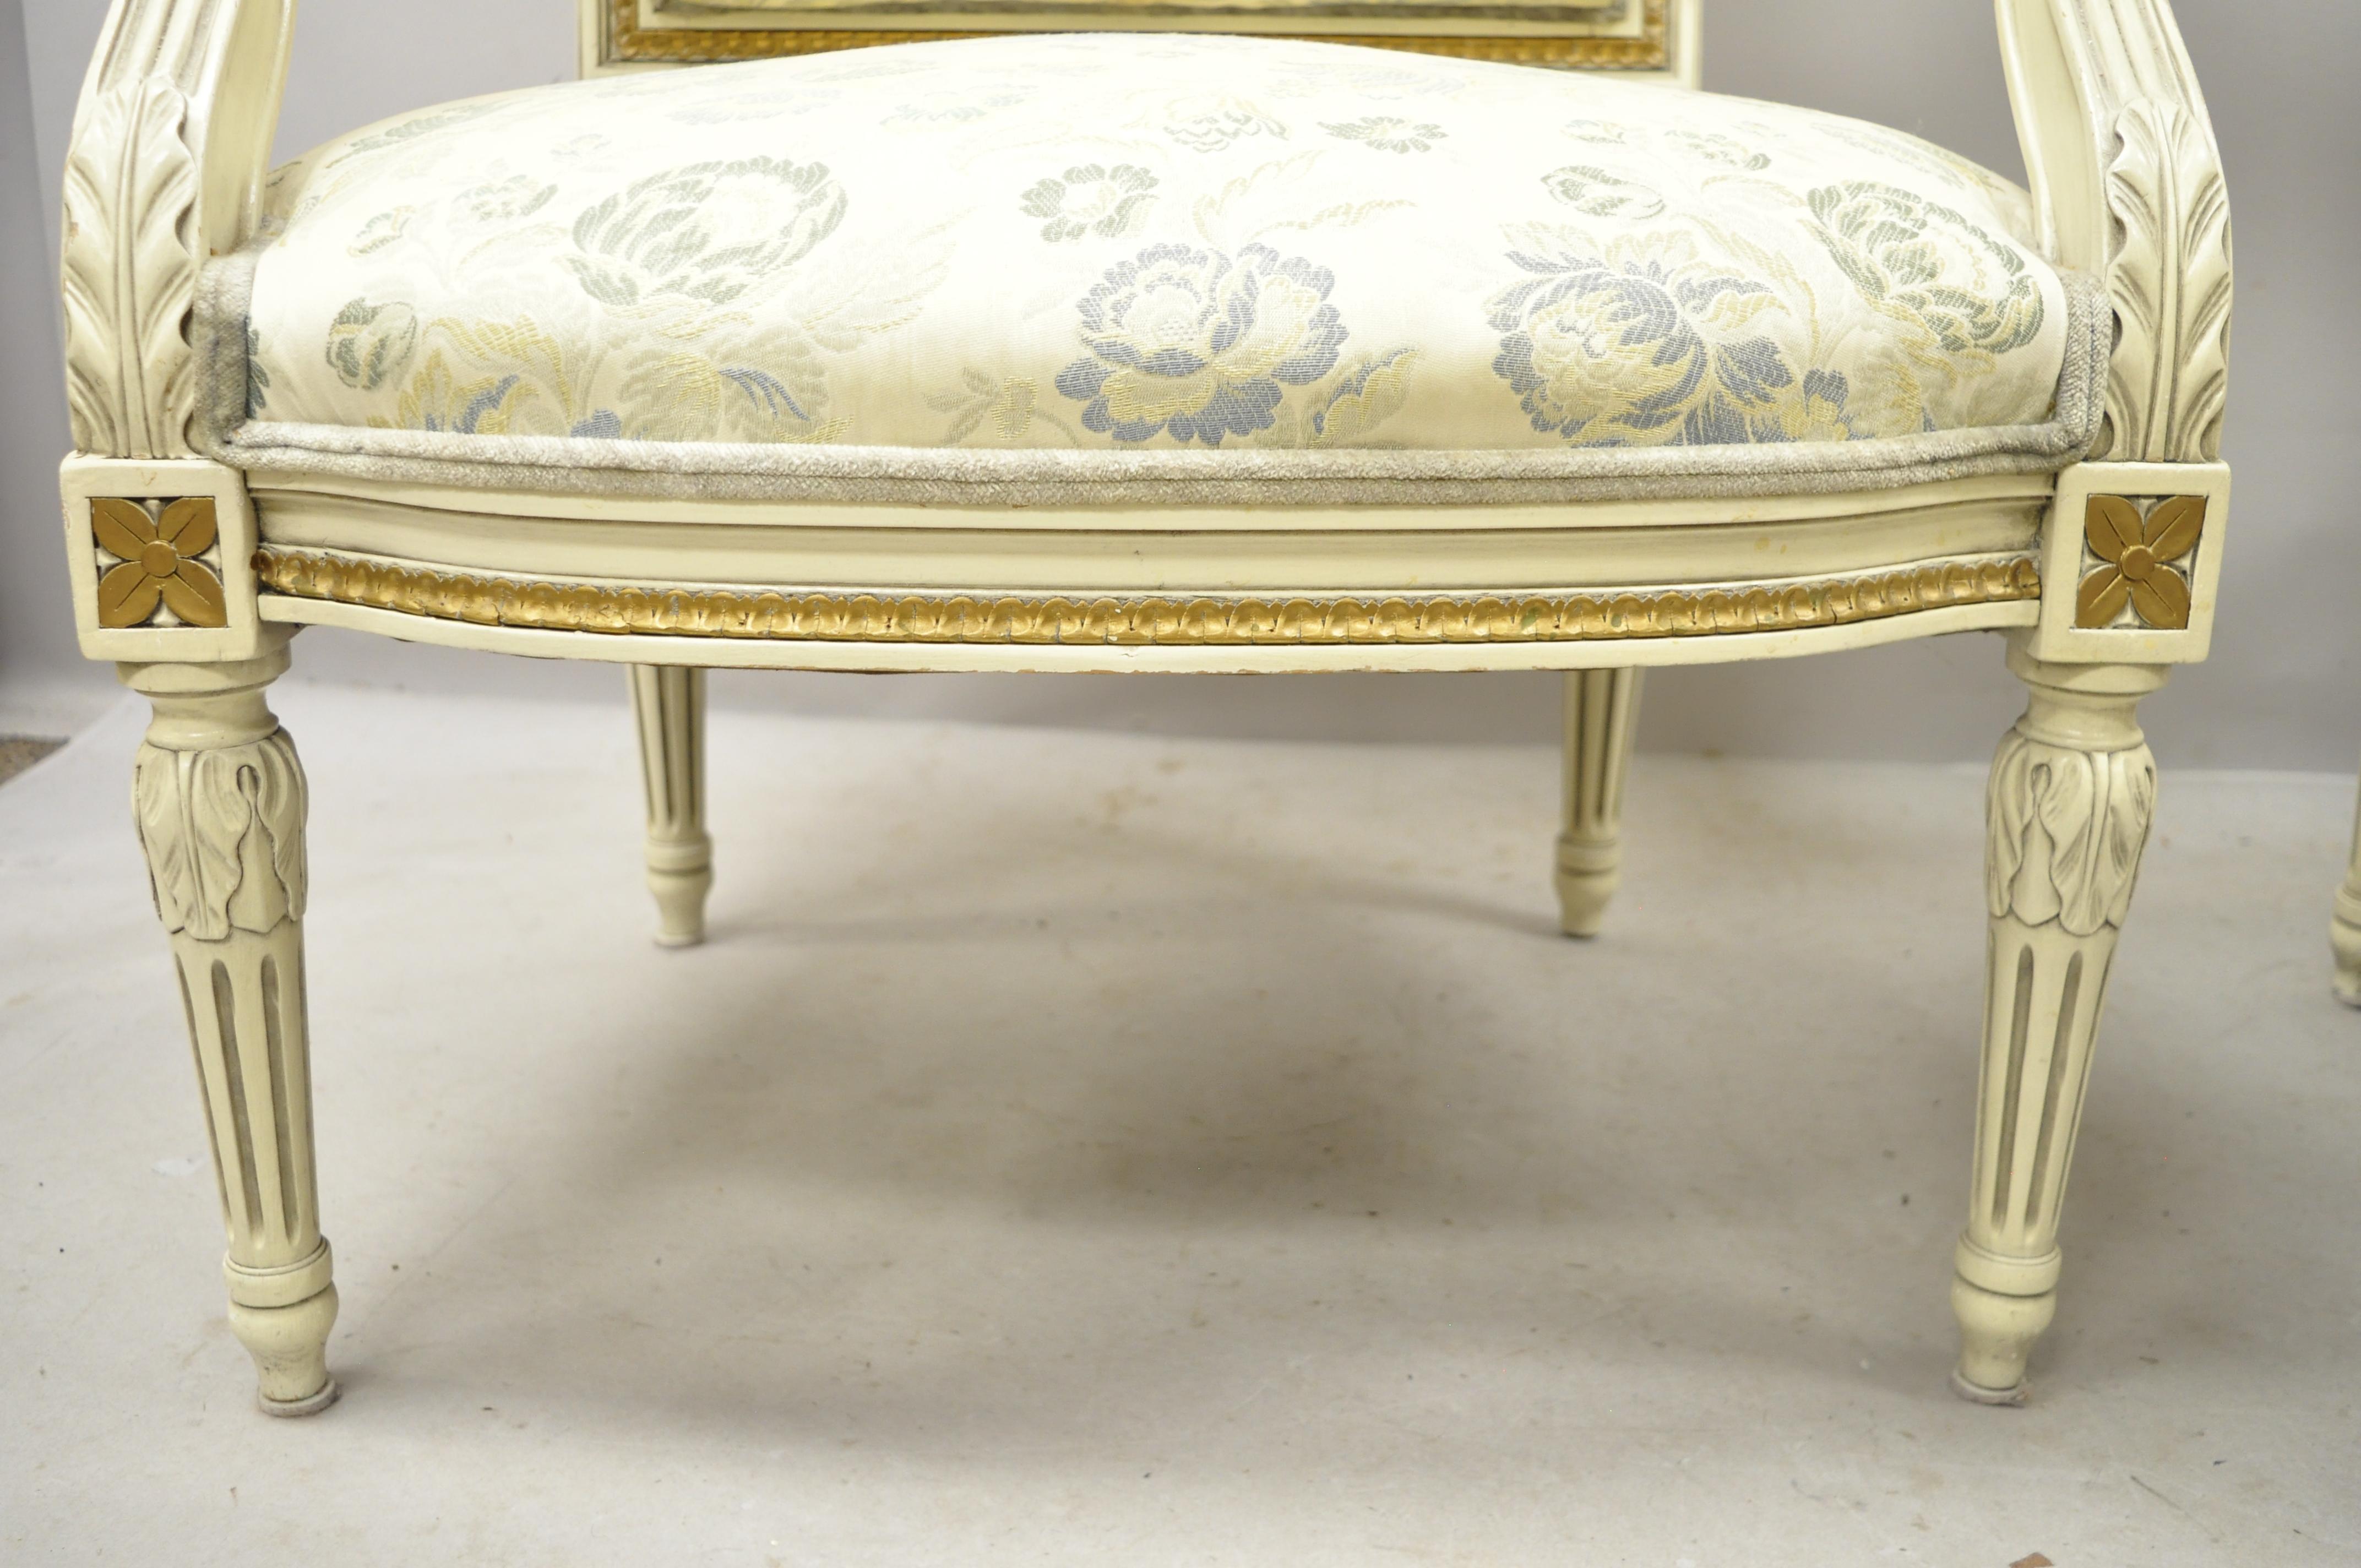 Vintage French Provincial Louis XVI Cream Painted Fauteuil Armchairs, a Pair For Sale 2